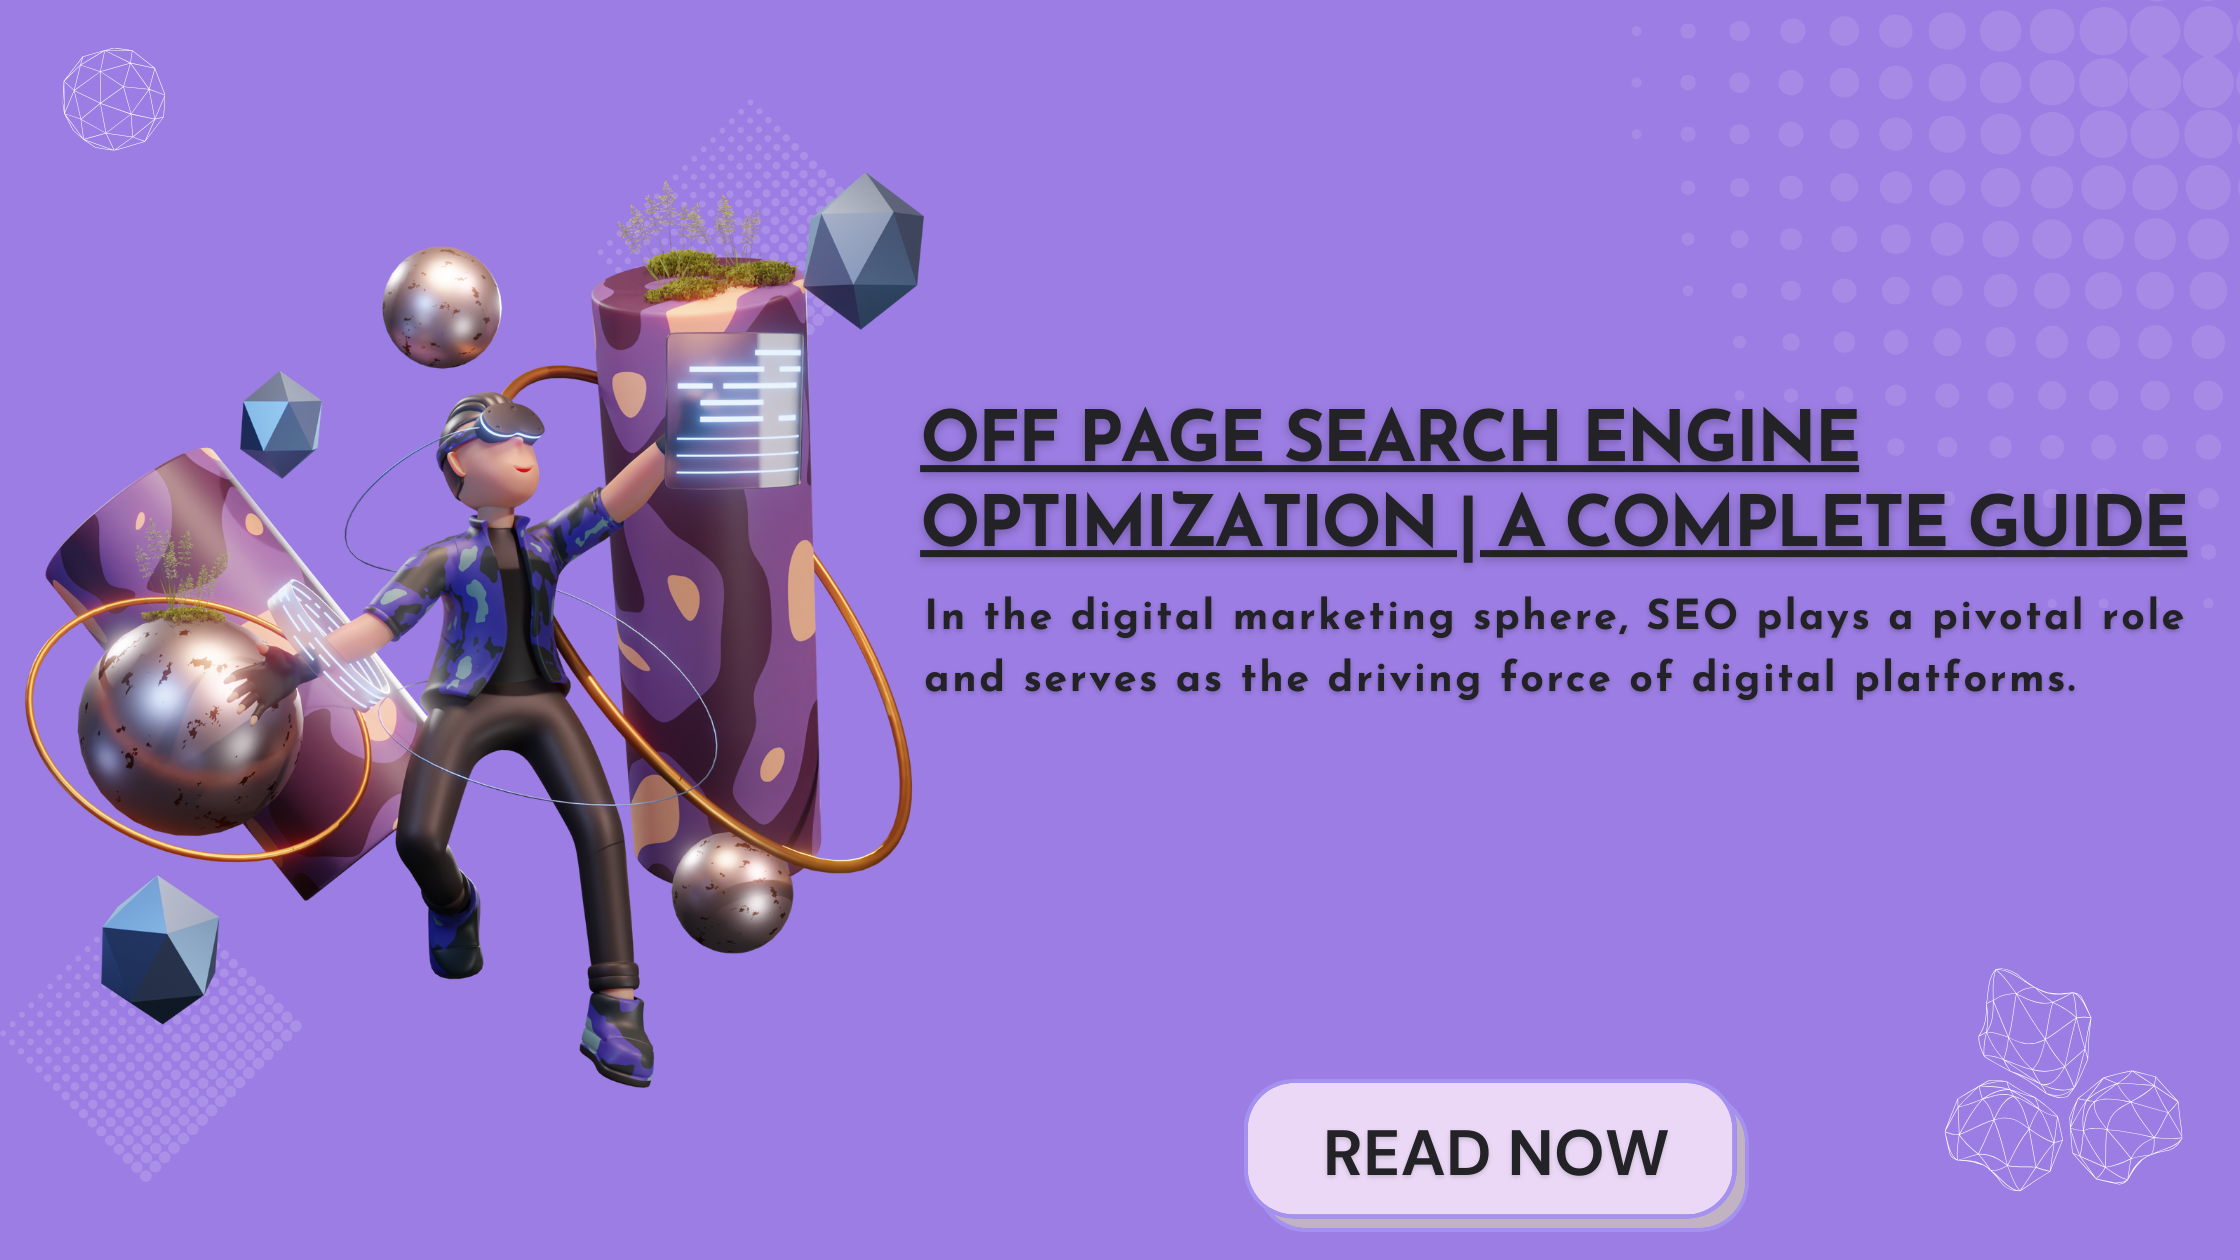 Off Page Search Engine Optimization